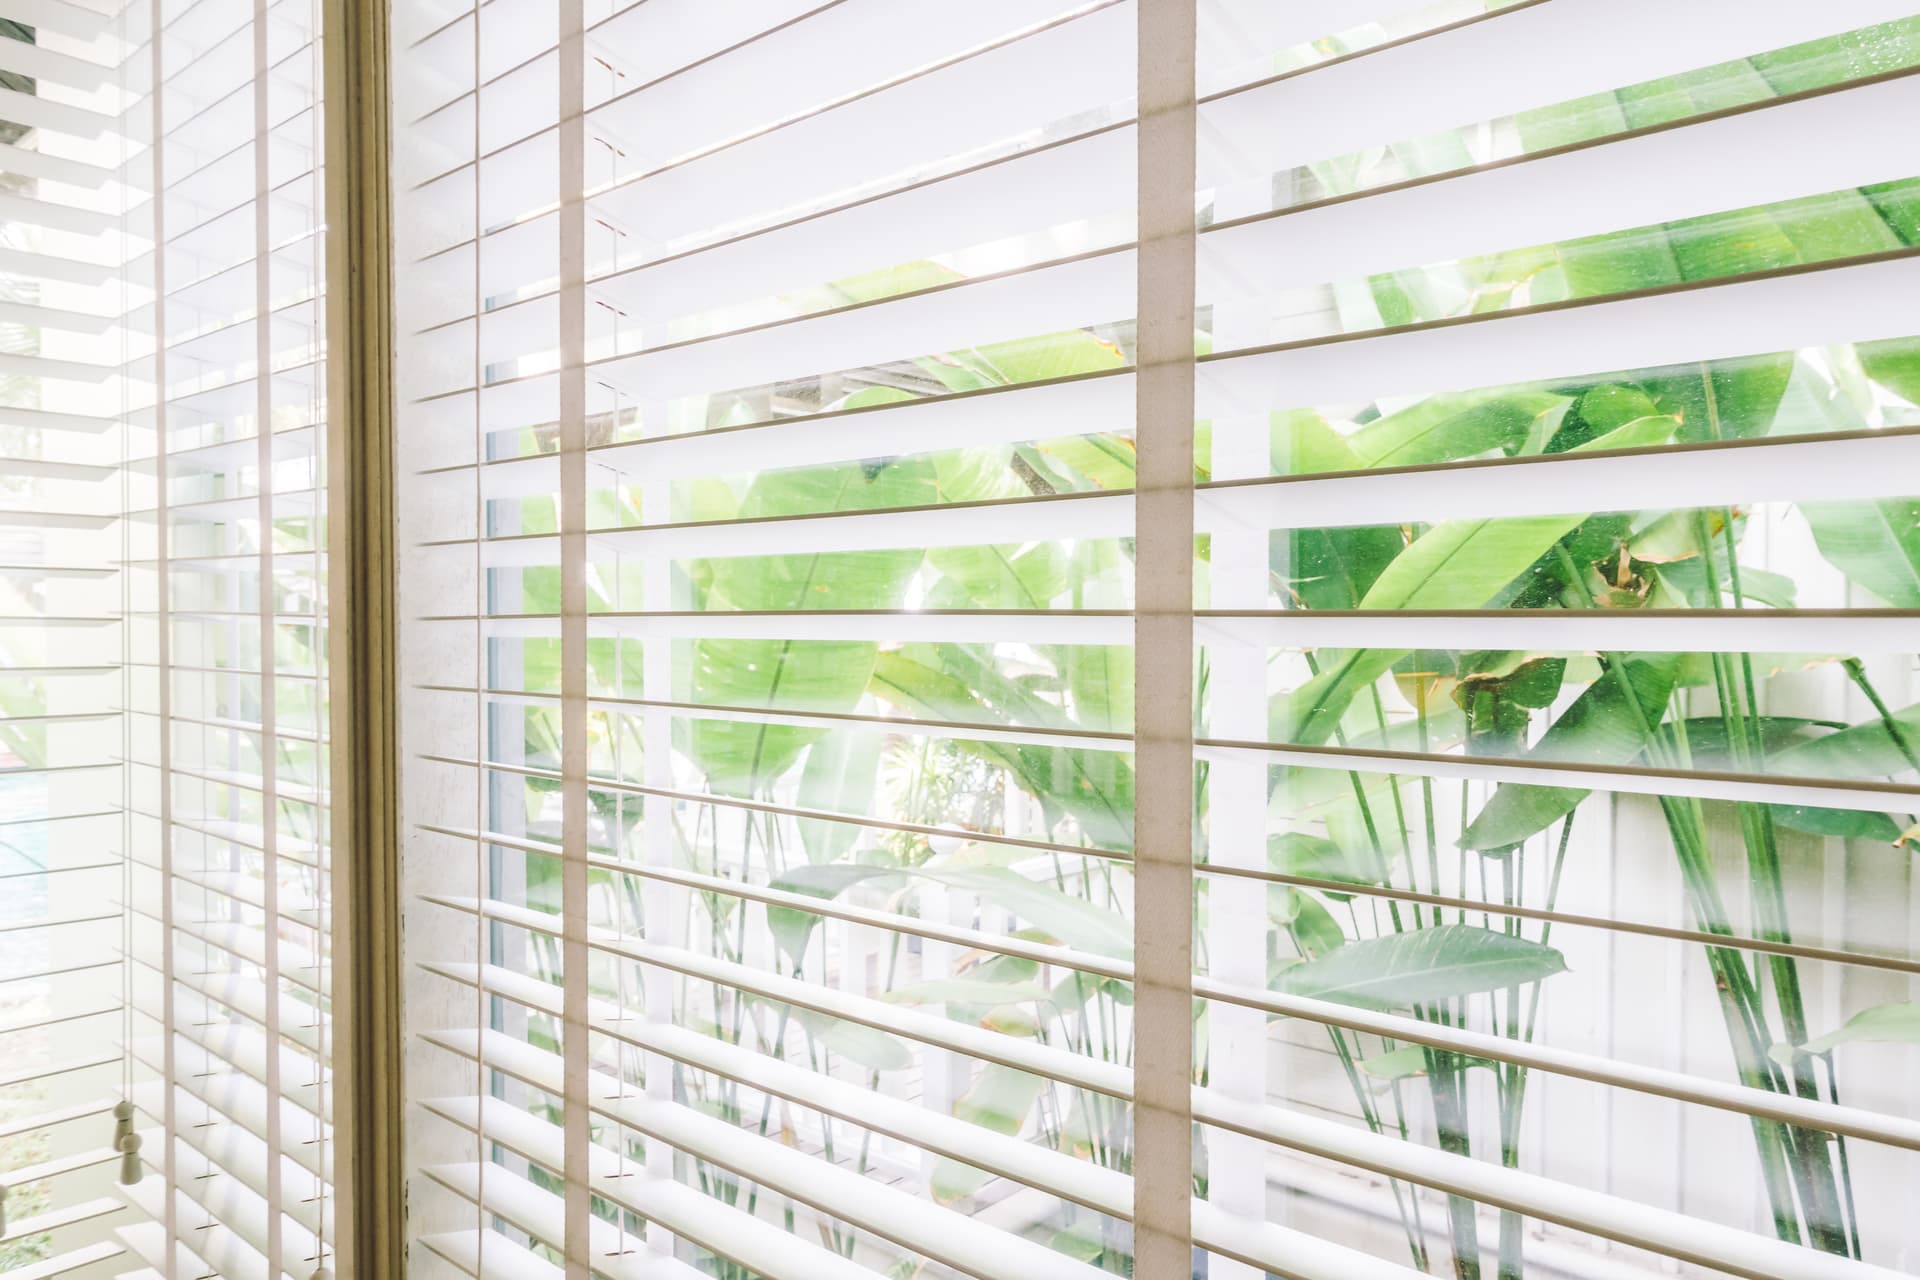 Curtain or Blinds: A Comparison of Window Coverings for Easy Maintenance